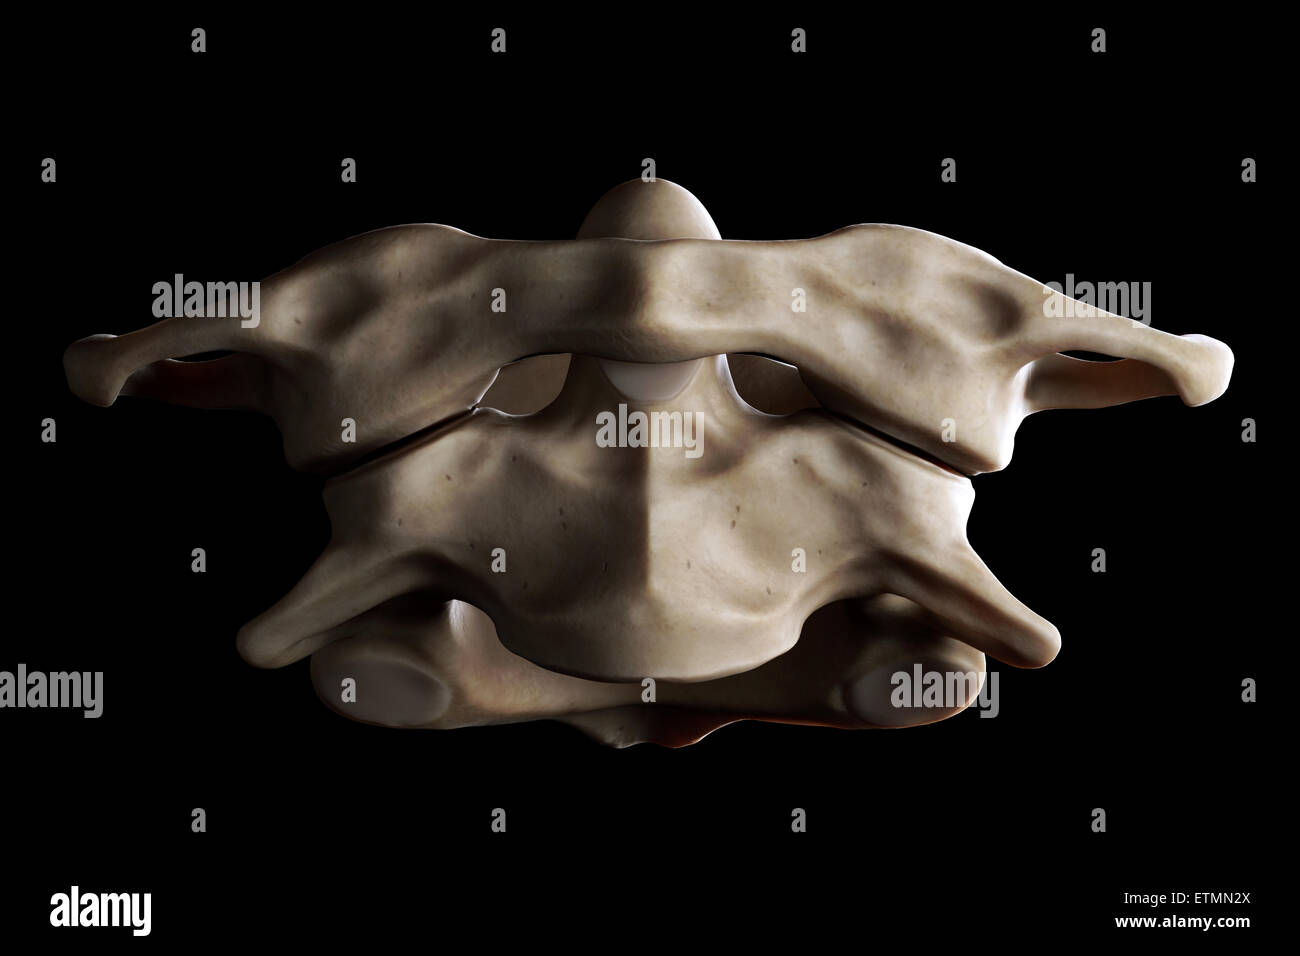 Illustration showing the atlas and axis vertebrae of the neck Stock Photo -  Alamy